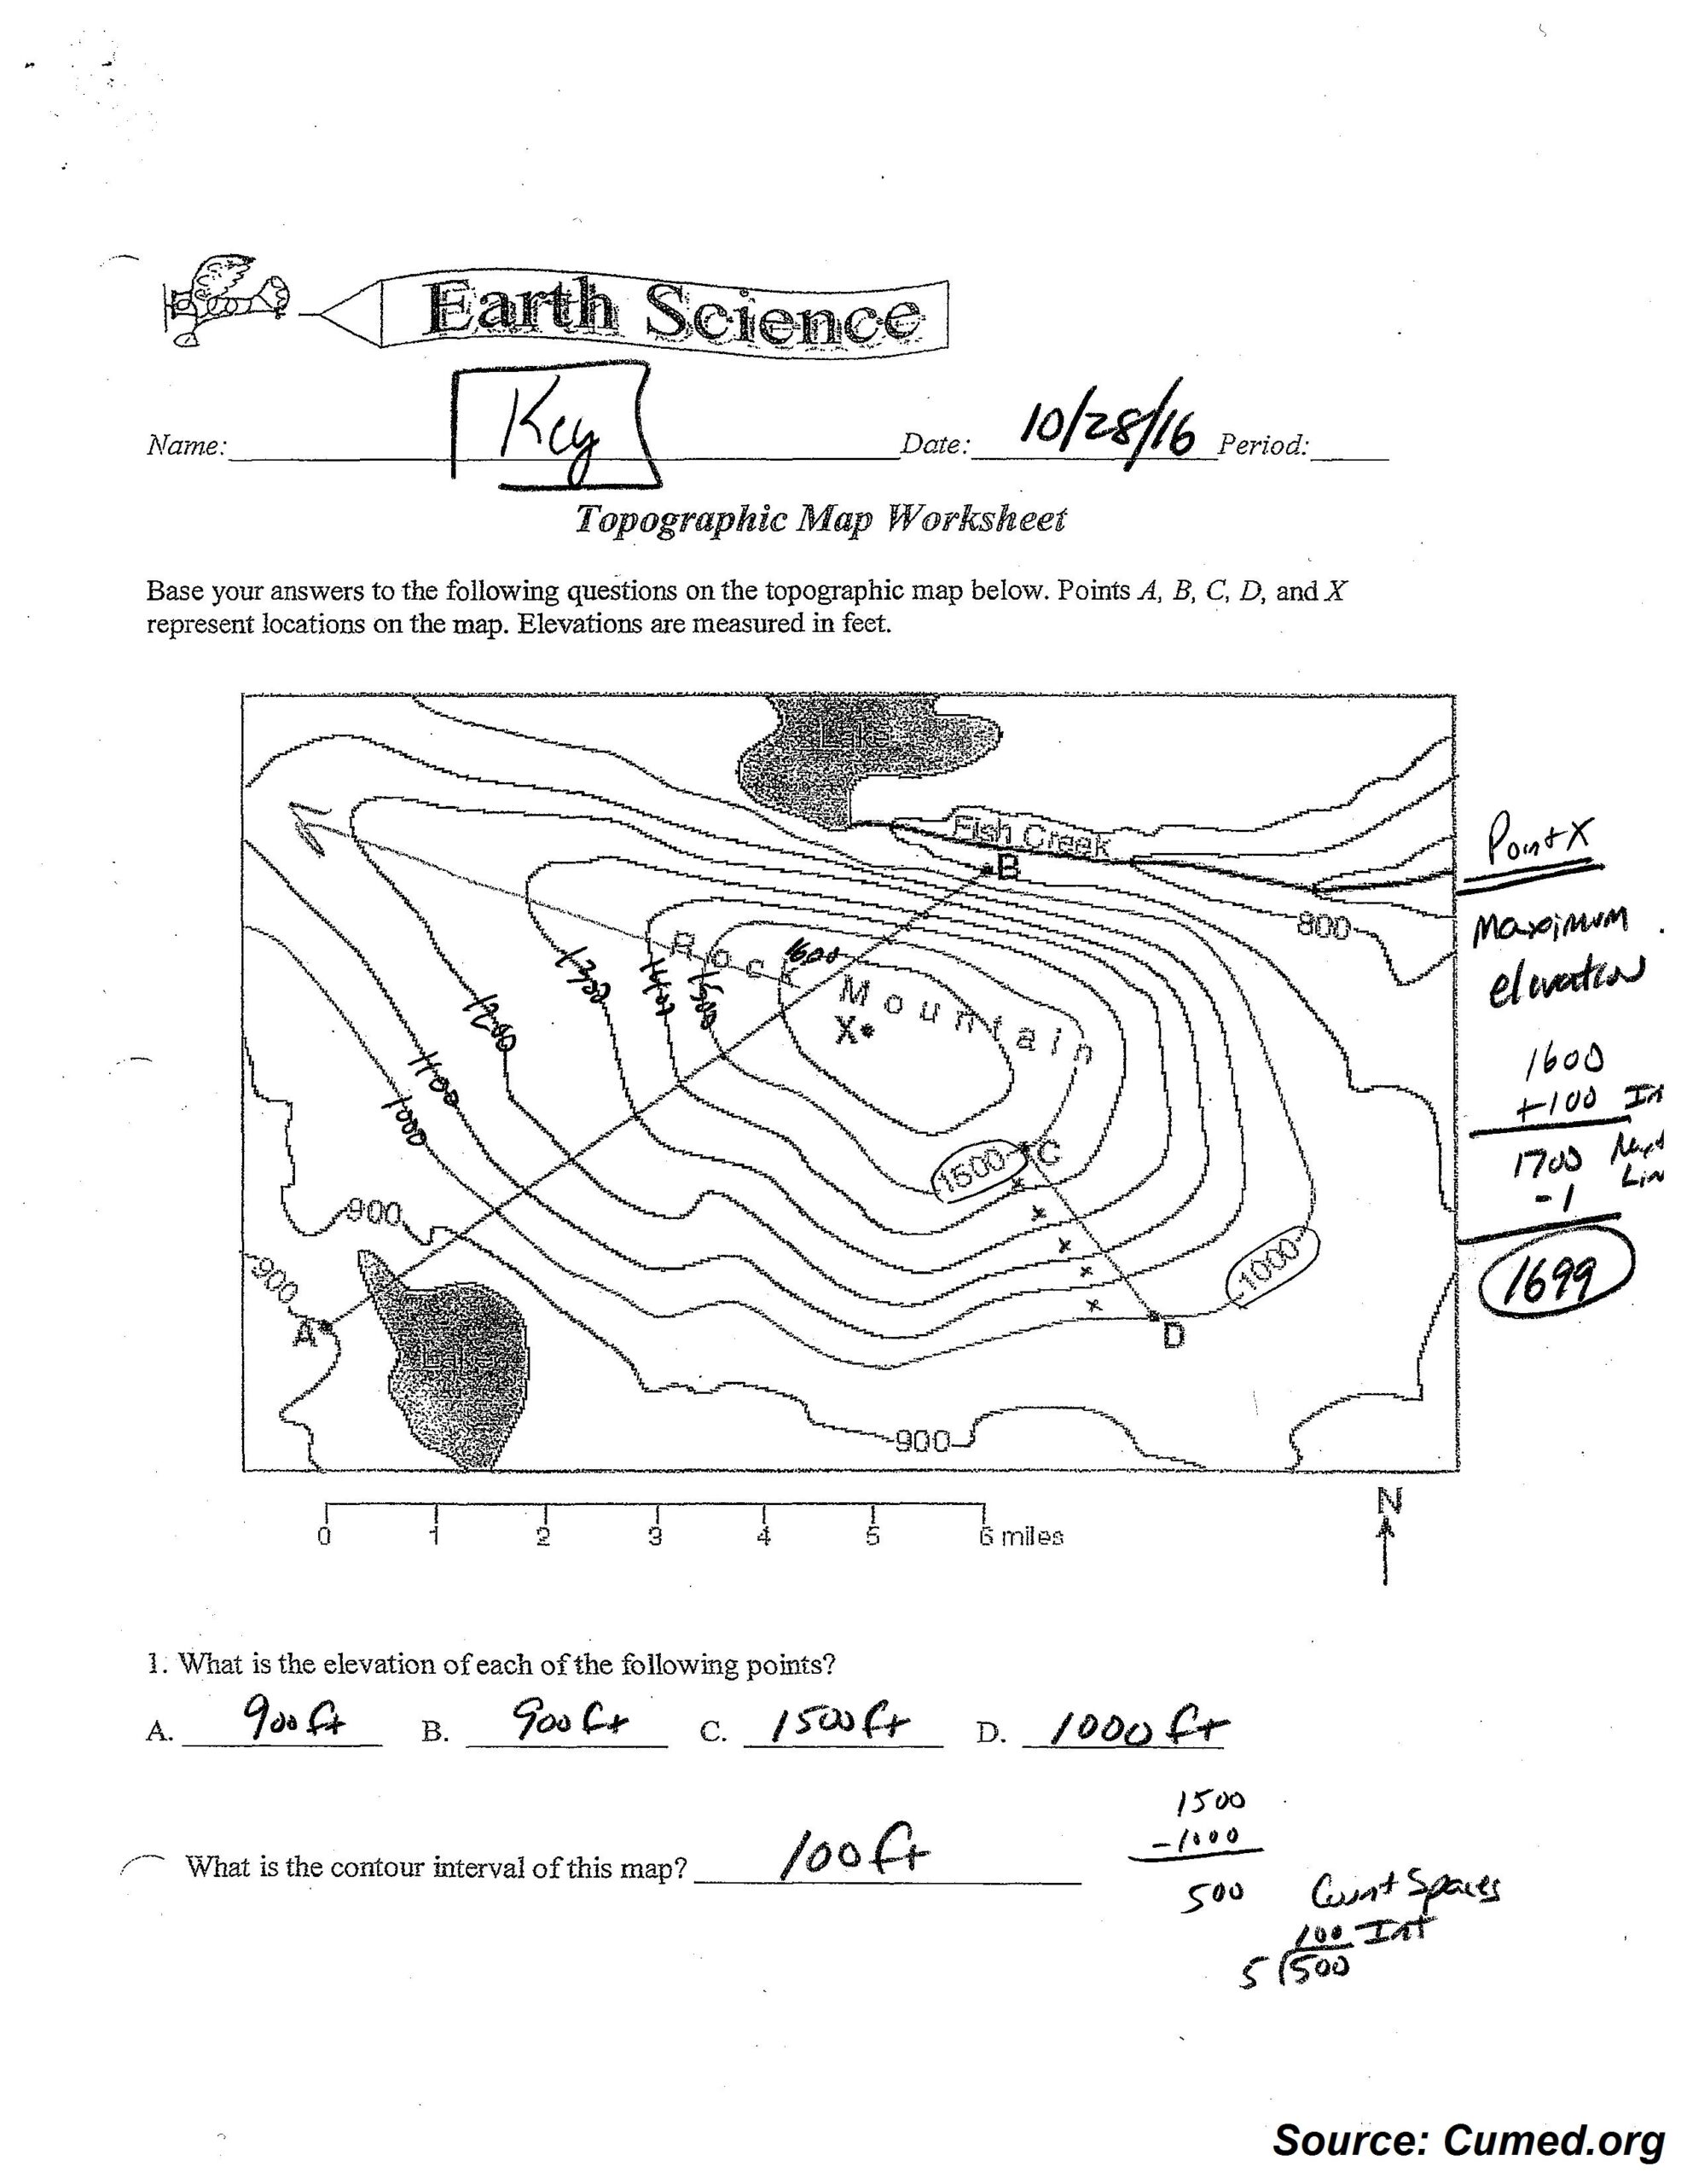 Topographic Map Worksheet Answer Key 6